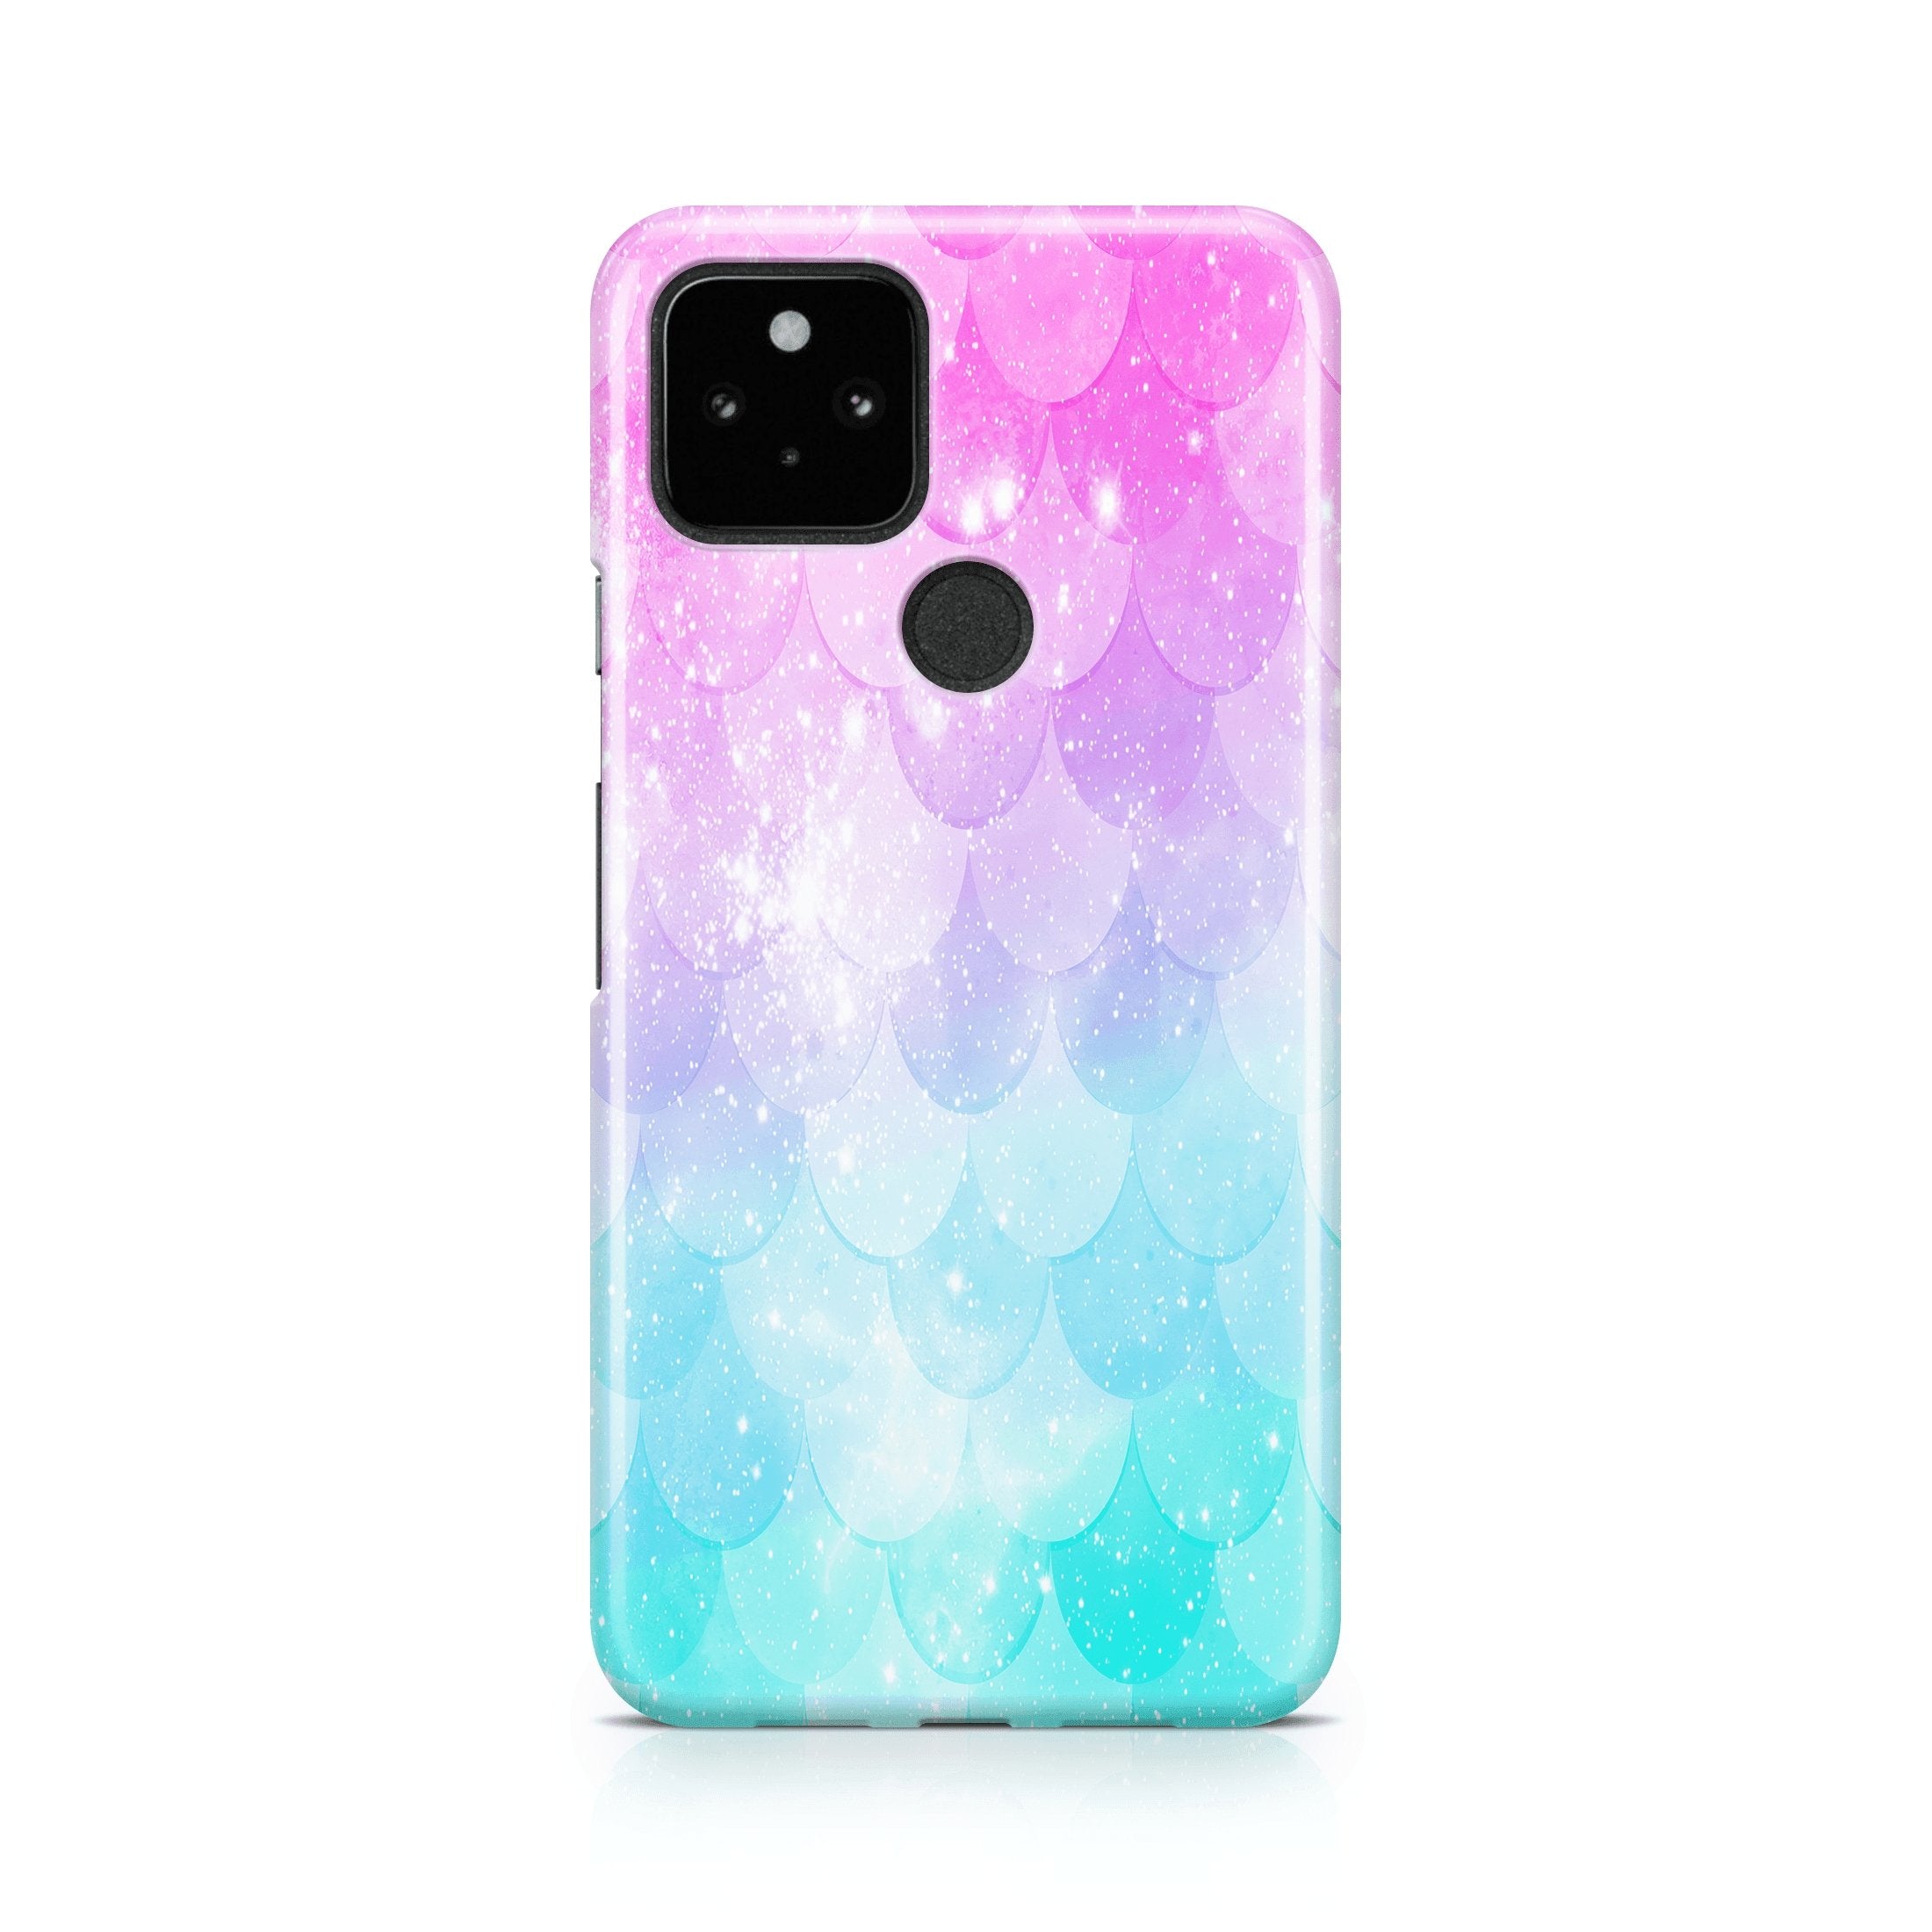 Rainbow Mermaid Scale - Google phone case designs by CaseSwagger